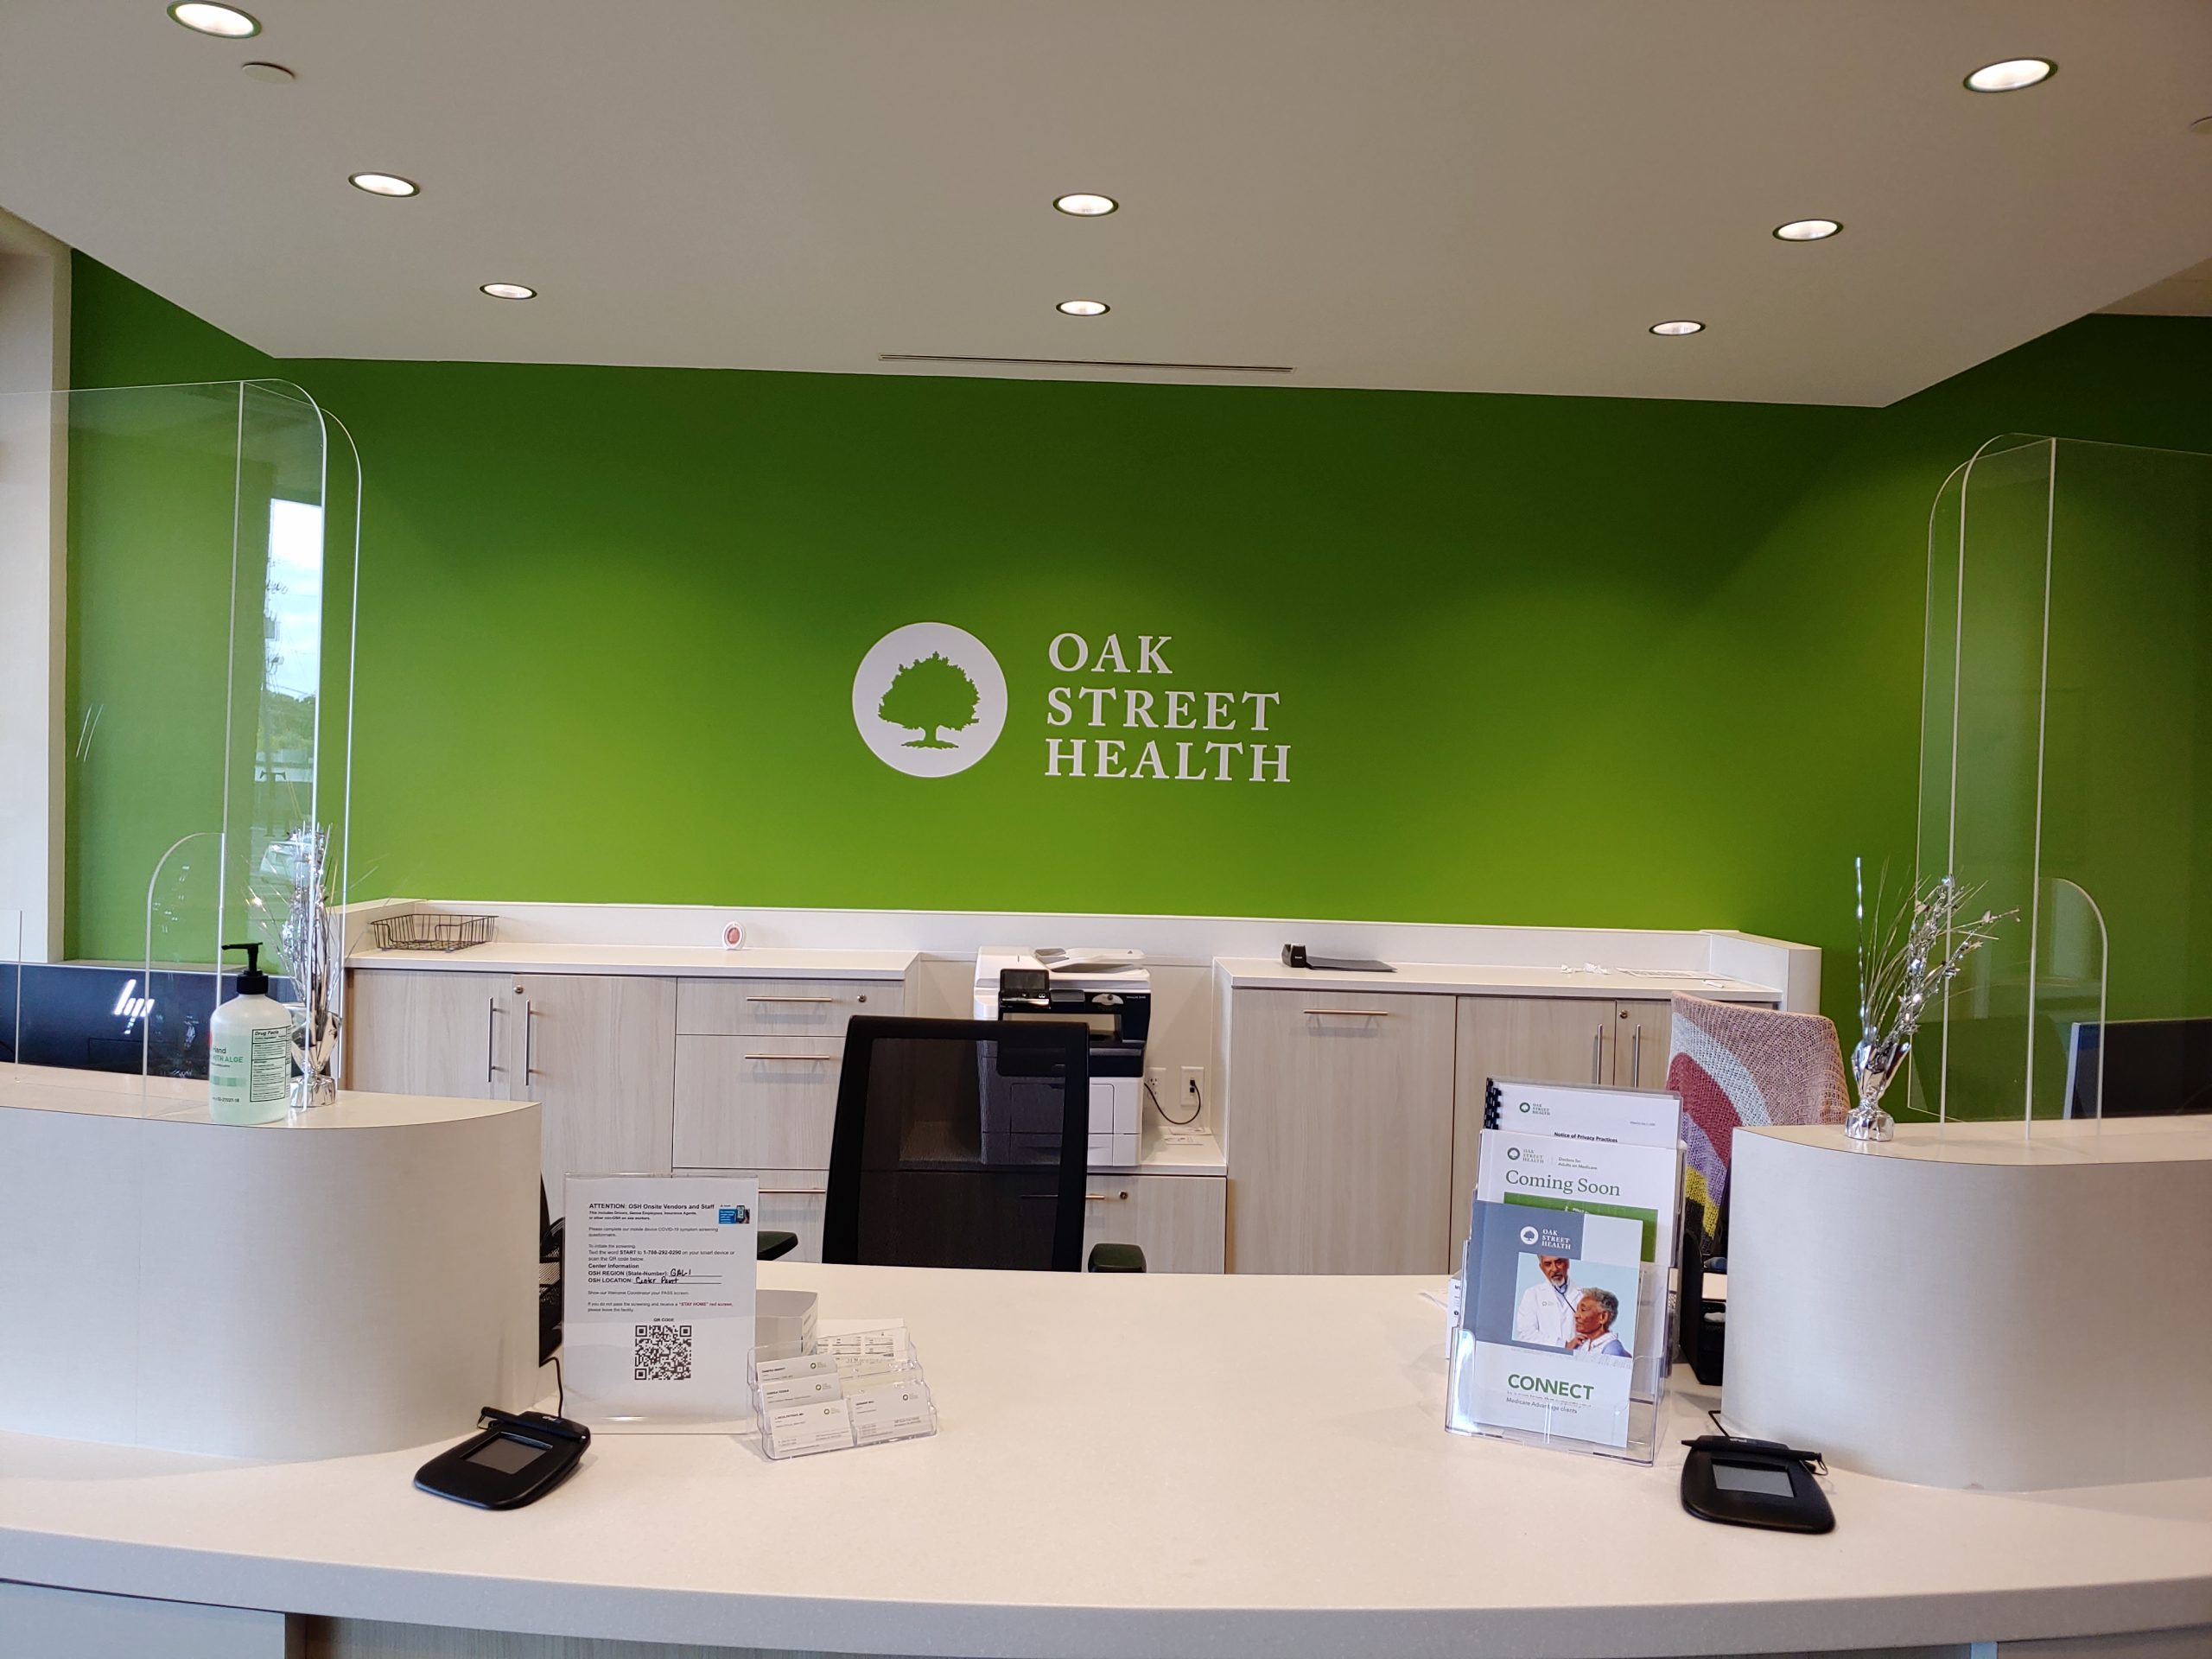 Oak Street Health in Center Point offering more than wellness care